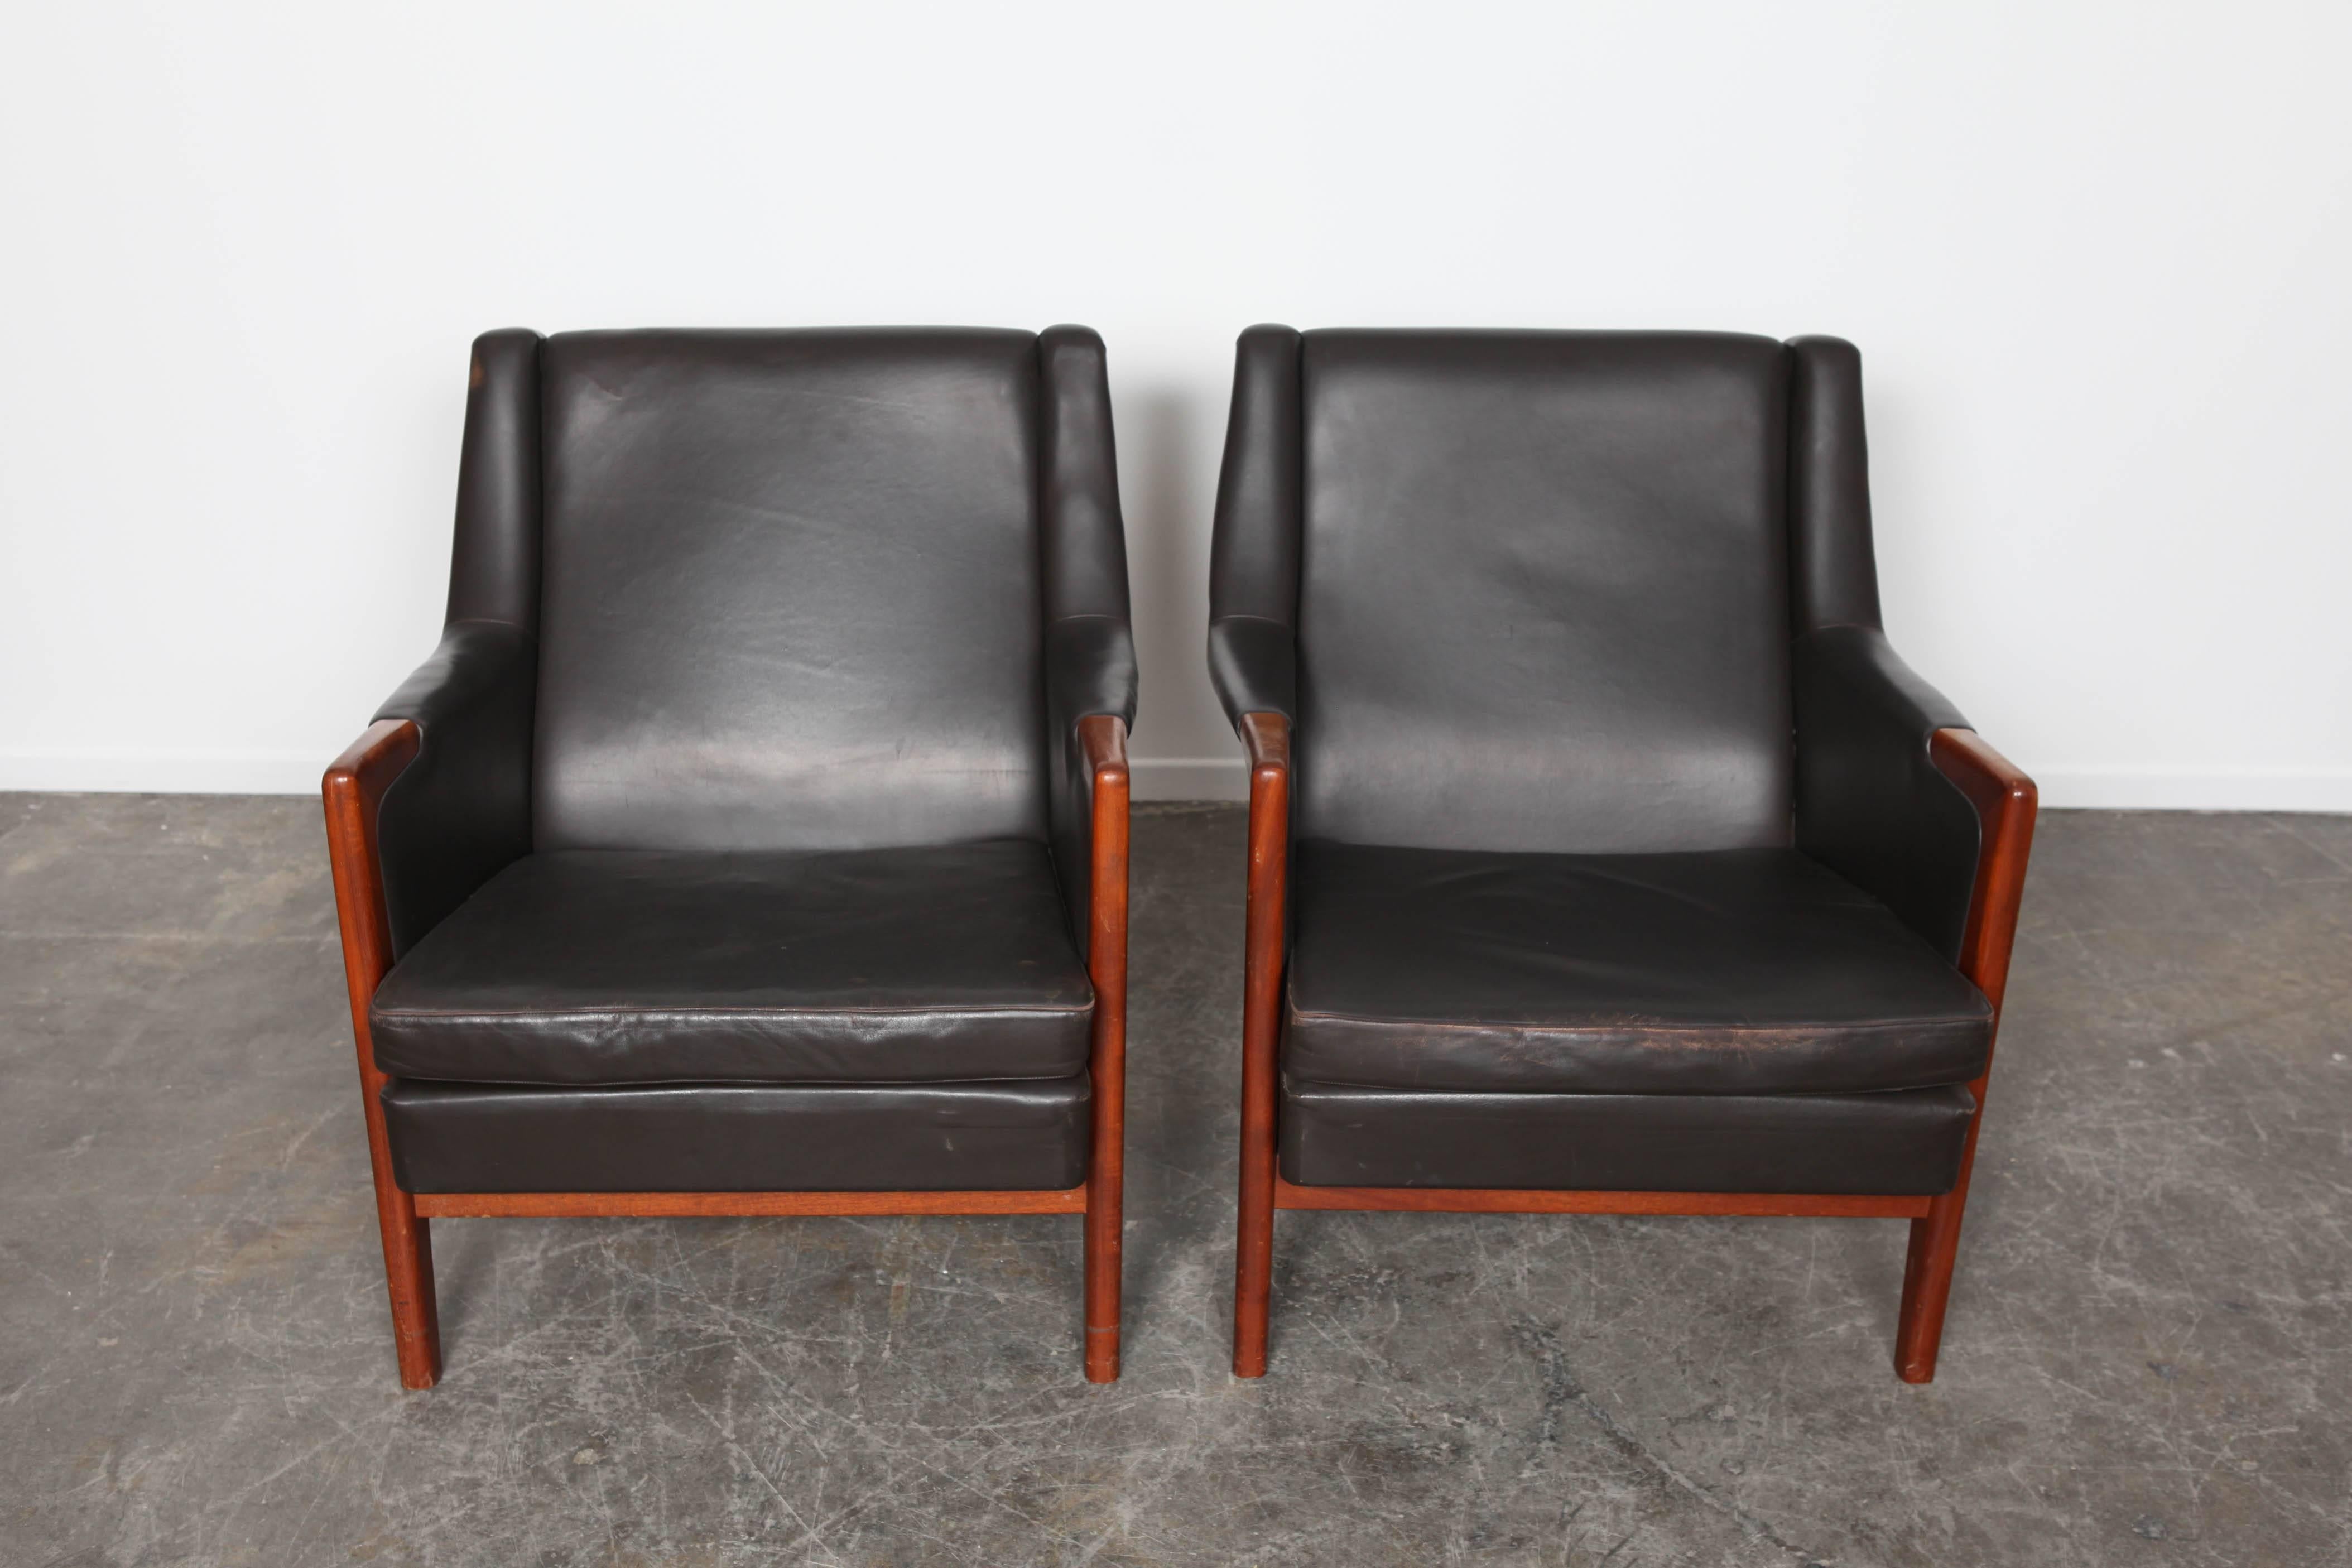 Pair of black leather lounge chairs Karl Erik Ekselius with front wooden legs that transition up to armrest.